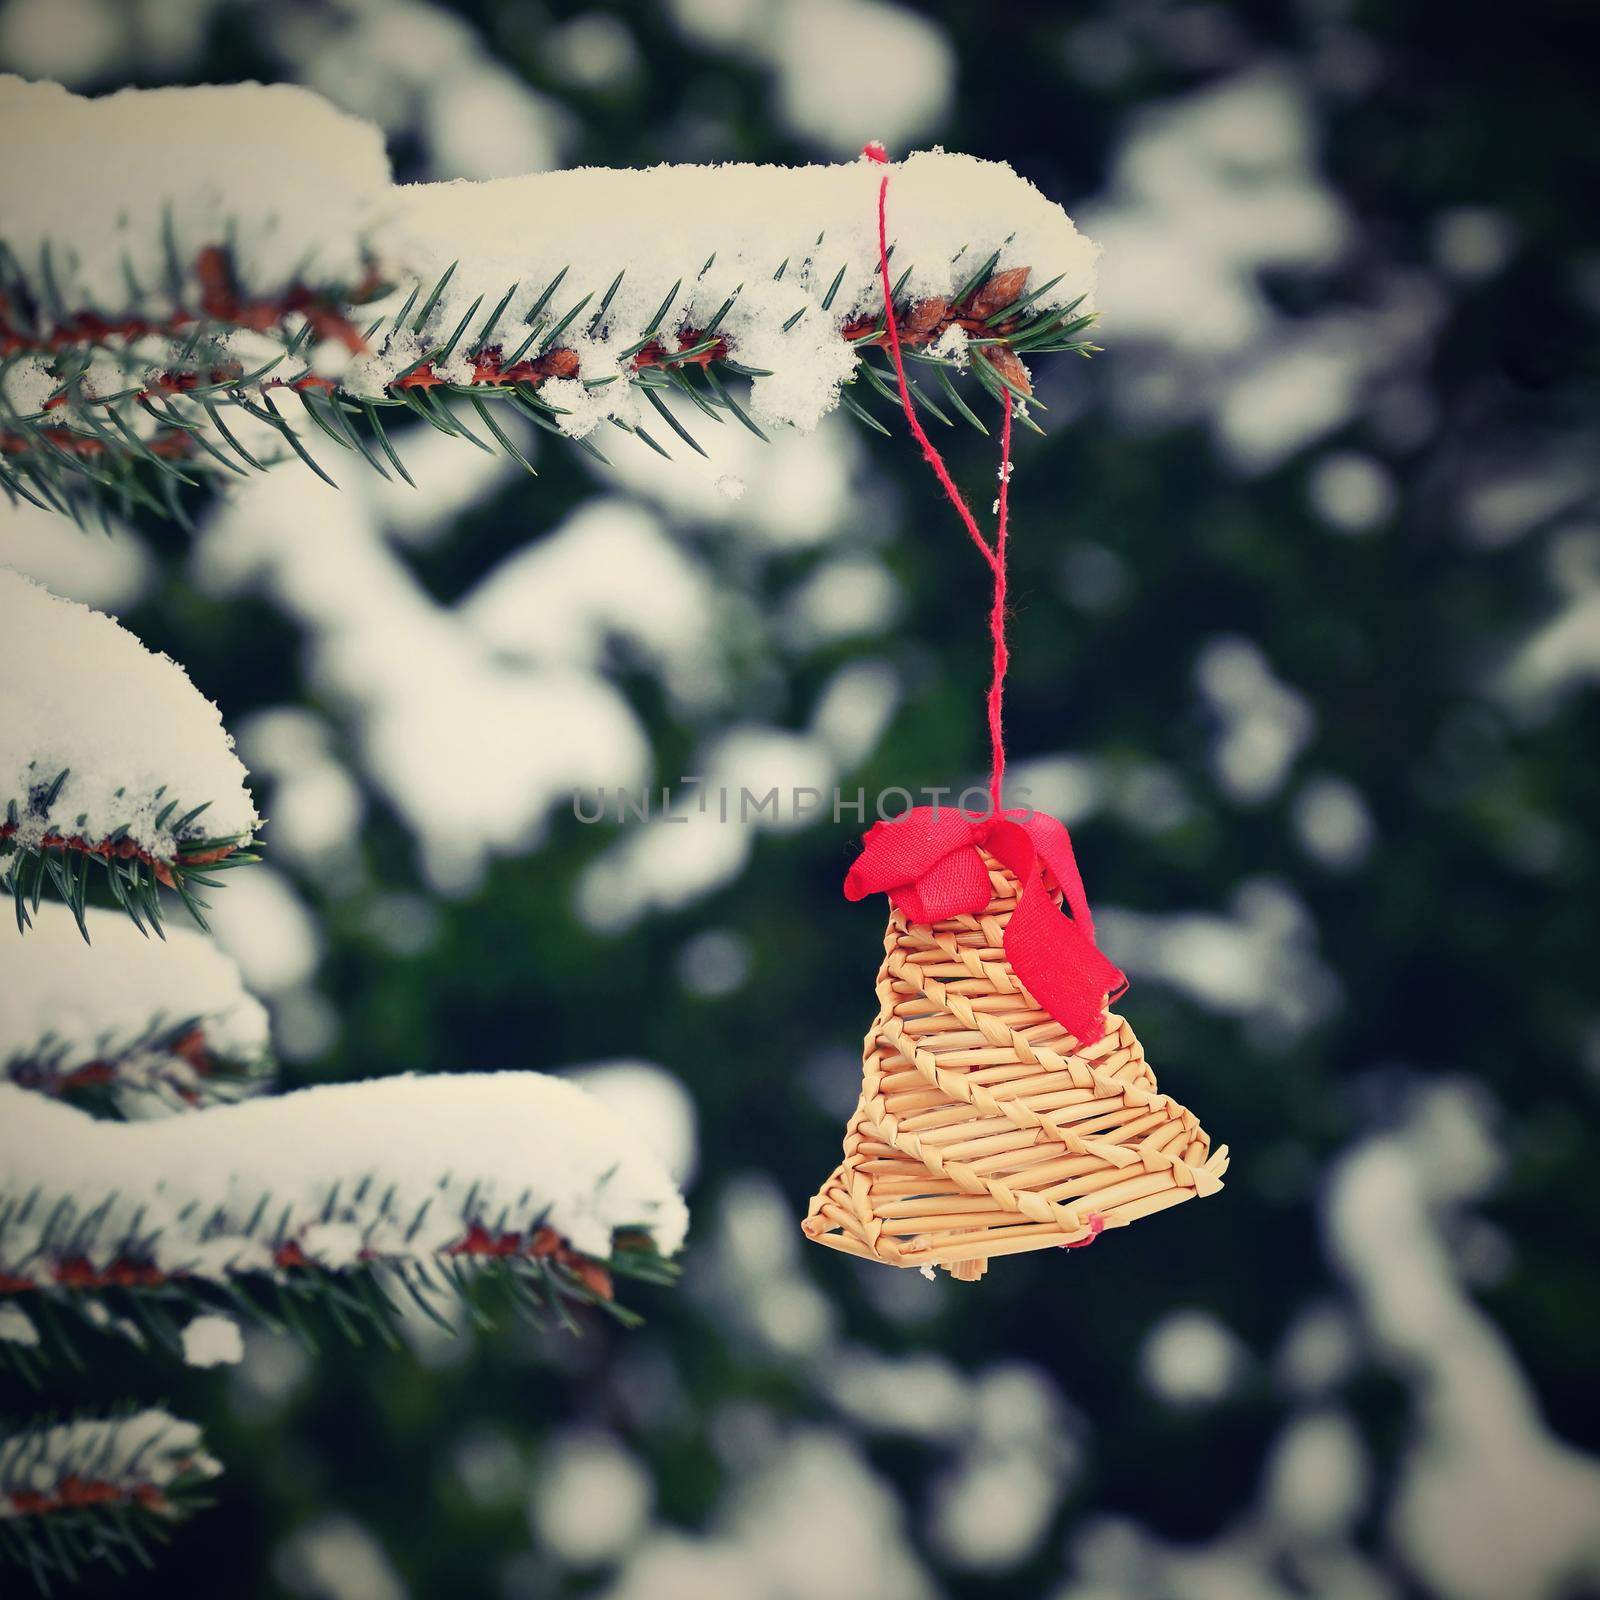 Beautiful natural Christmas decorations made of straw on a snowy Christmas tree. Winter nature colorful outdoor background for the holidays.